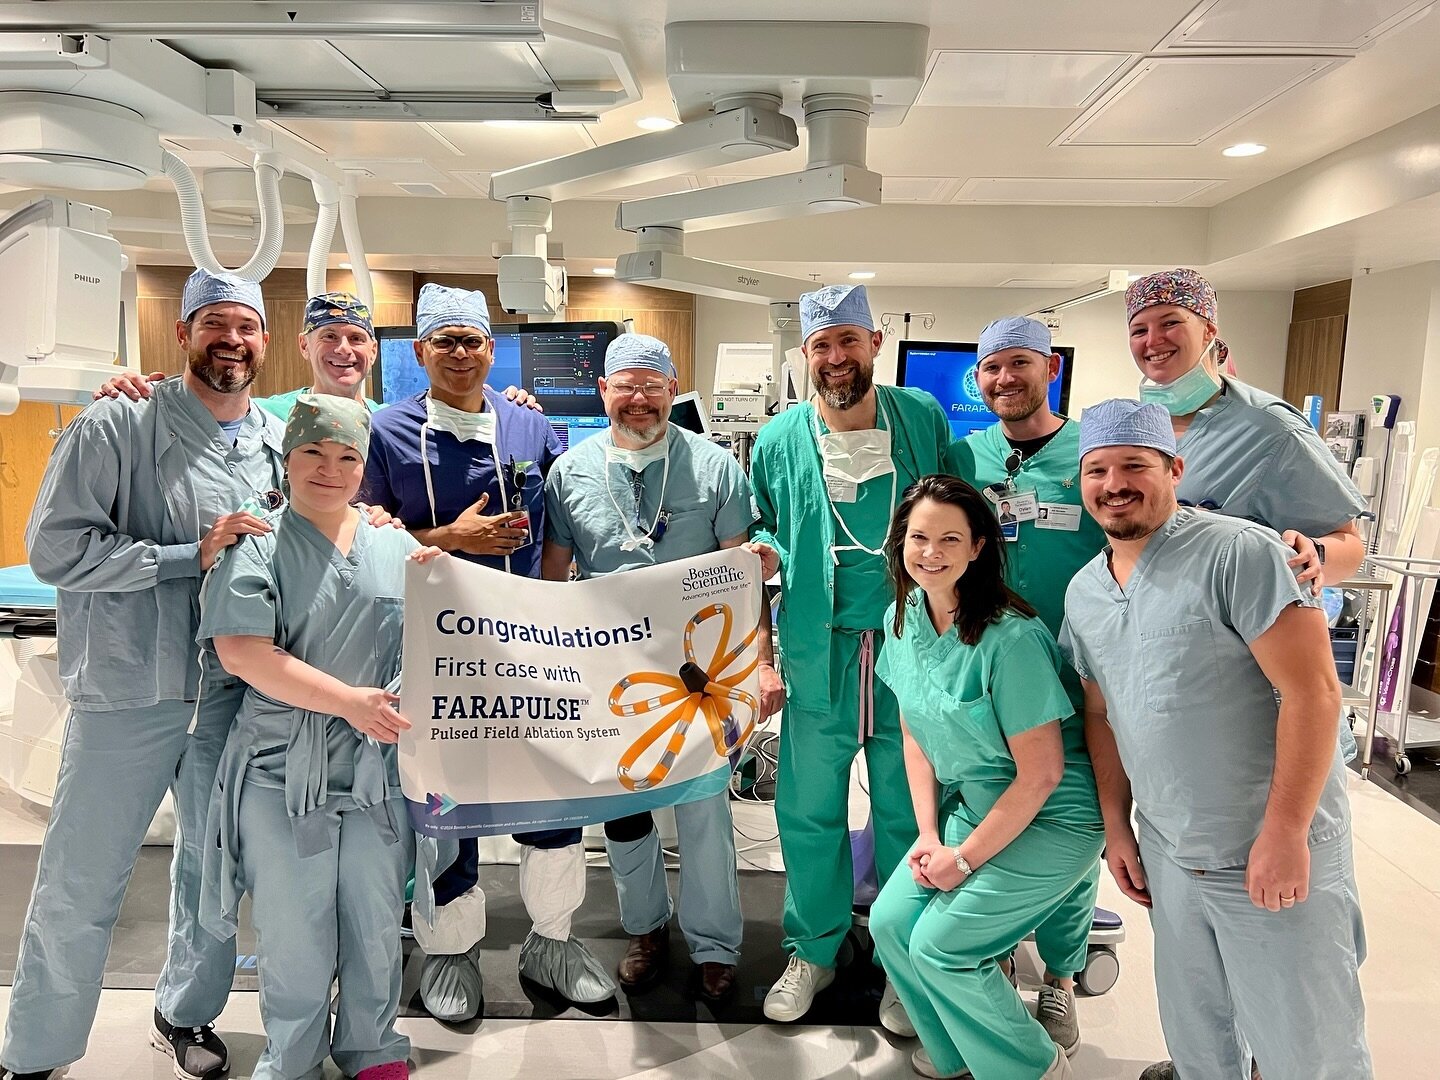 🎈 Huge congratulations to Venkata Bavikati, M.D. on his first case with the FARAPULSE TM pulsed field ablation (PFA) system! This ablation system is safer for patients, and simpler for providers &ndash; a major win all around. Southern Medical Group